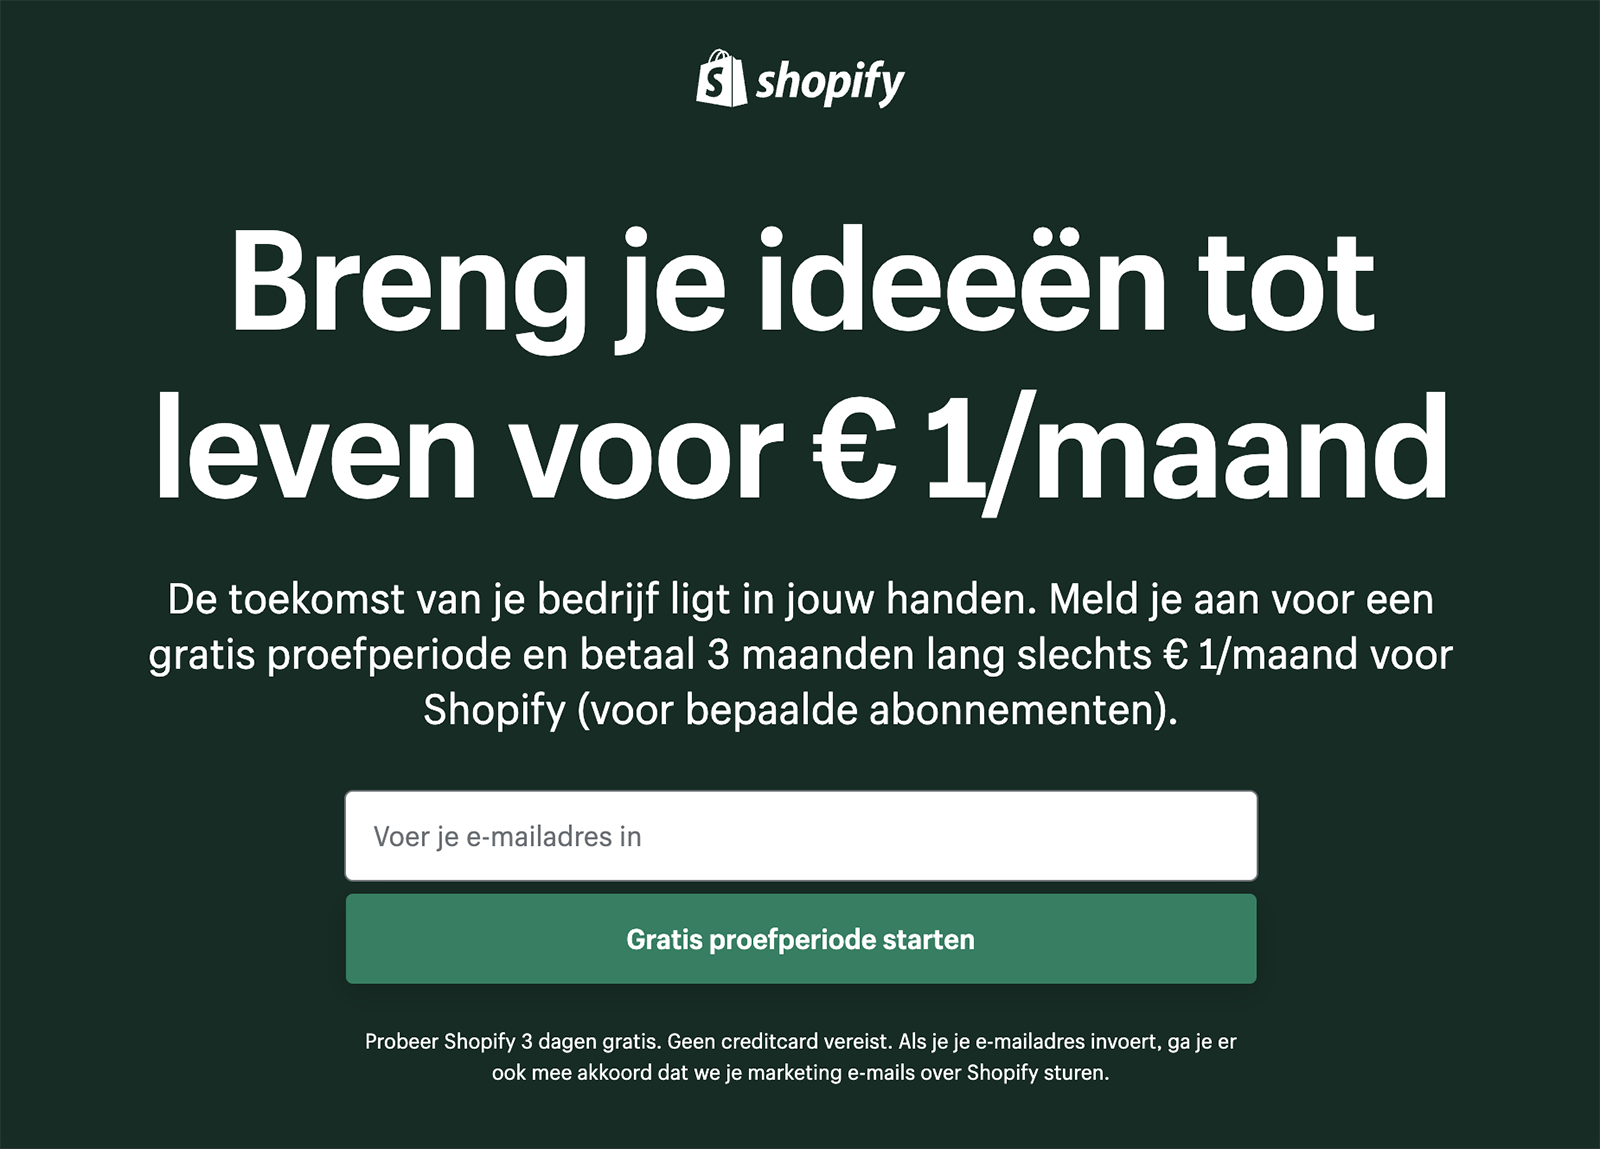 Start your Shopify webshop for €1